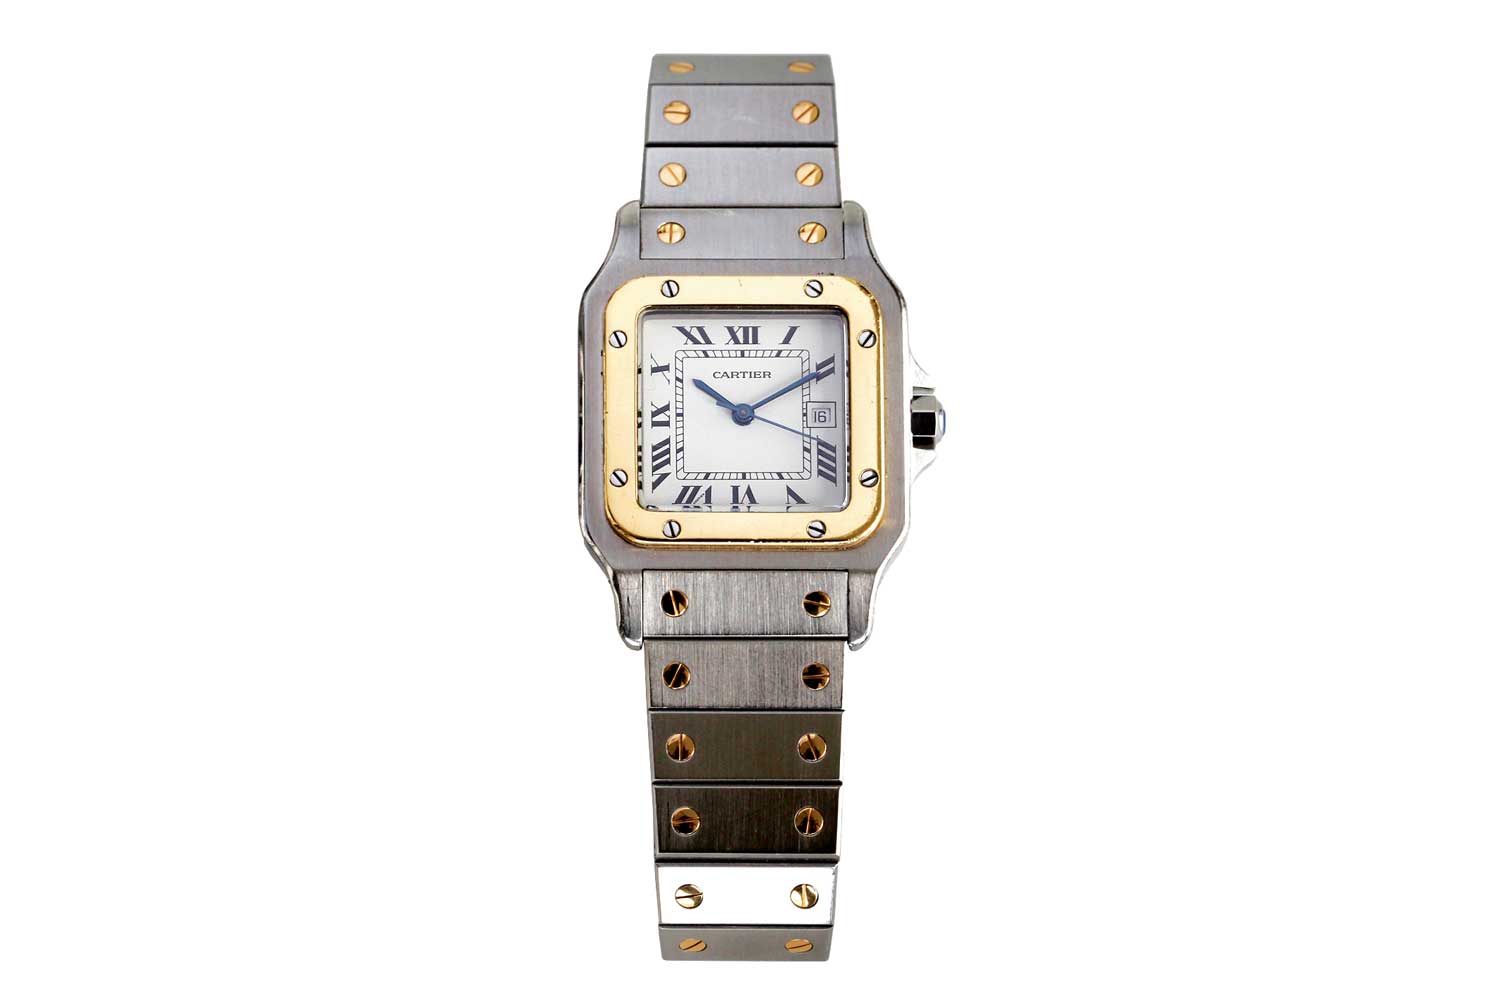 The 1978 two-tone Santos launched by Cartier under the stewardship of Alain-Dominique Perrin; it was his idea to render the watch with a gold bezel contrasted by steel screws; and then, in a brilliant design stroke, used the inverse pairing of gold screws on the steel bracelet, and ushered in the era of the two-tone dress watch